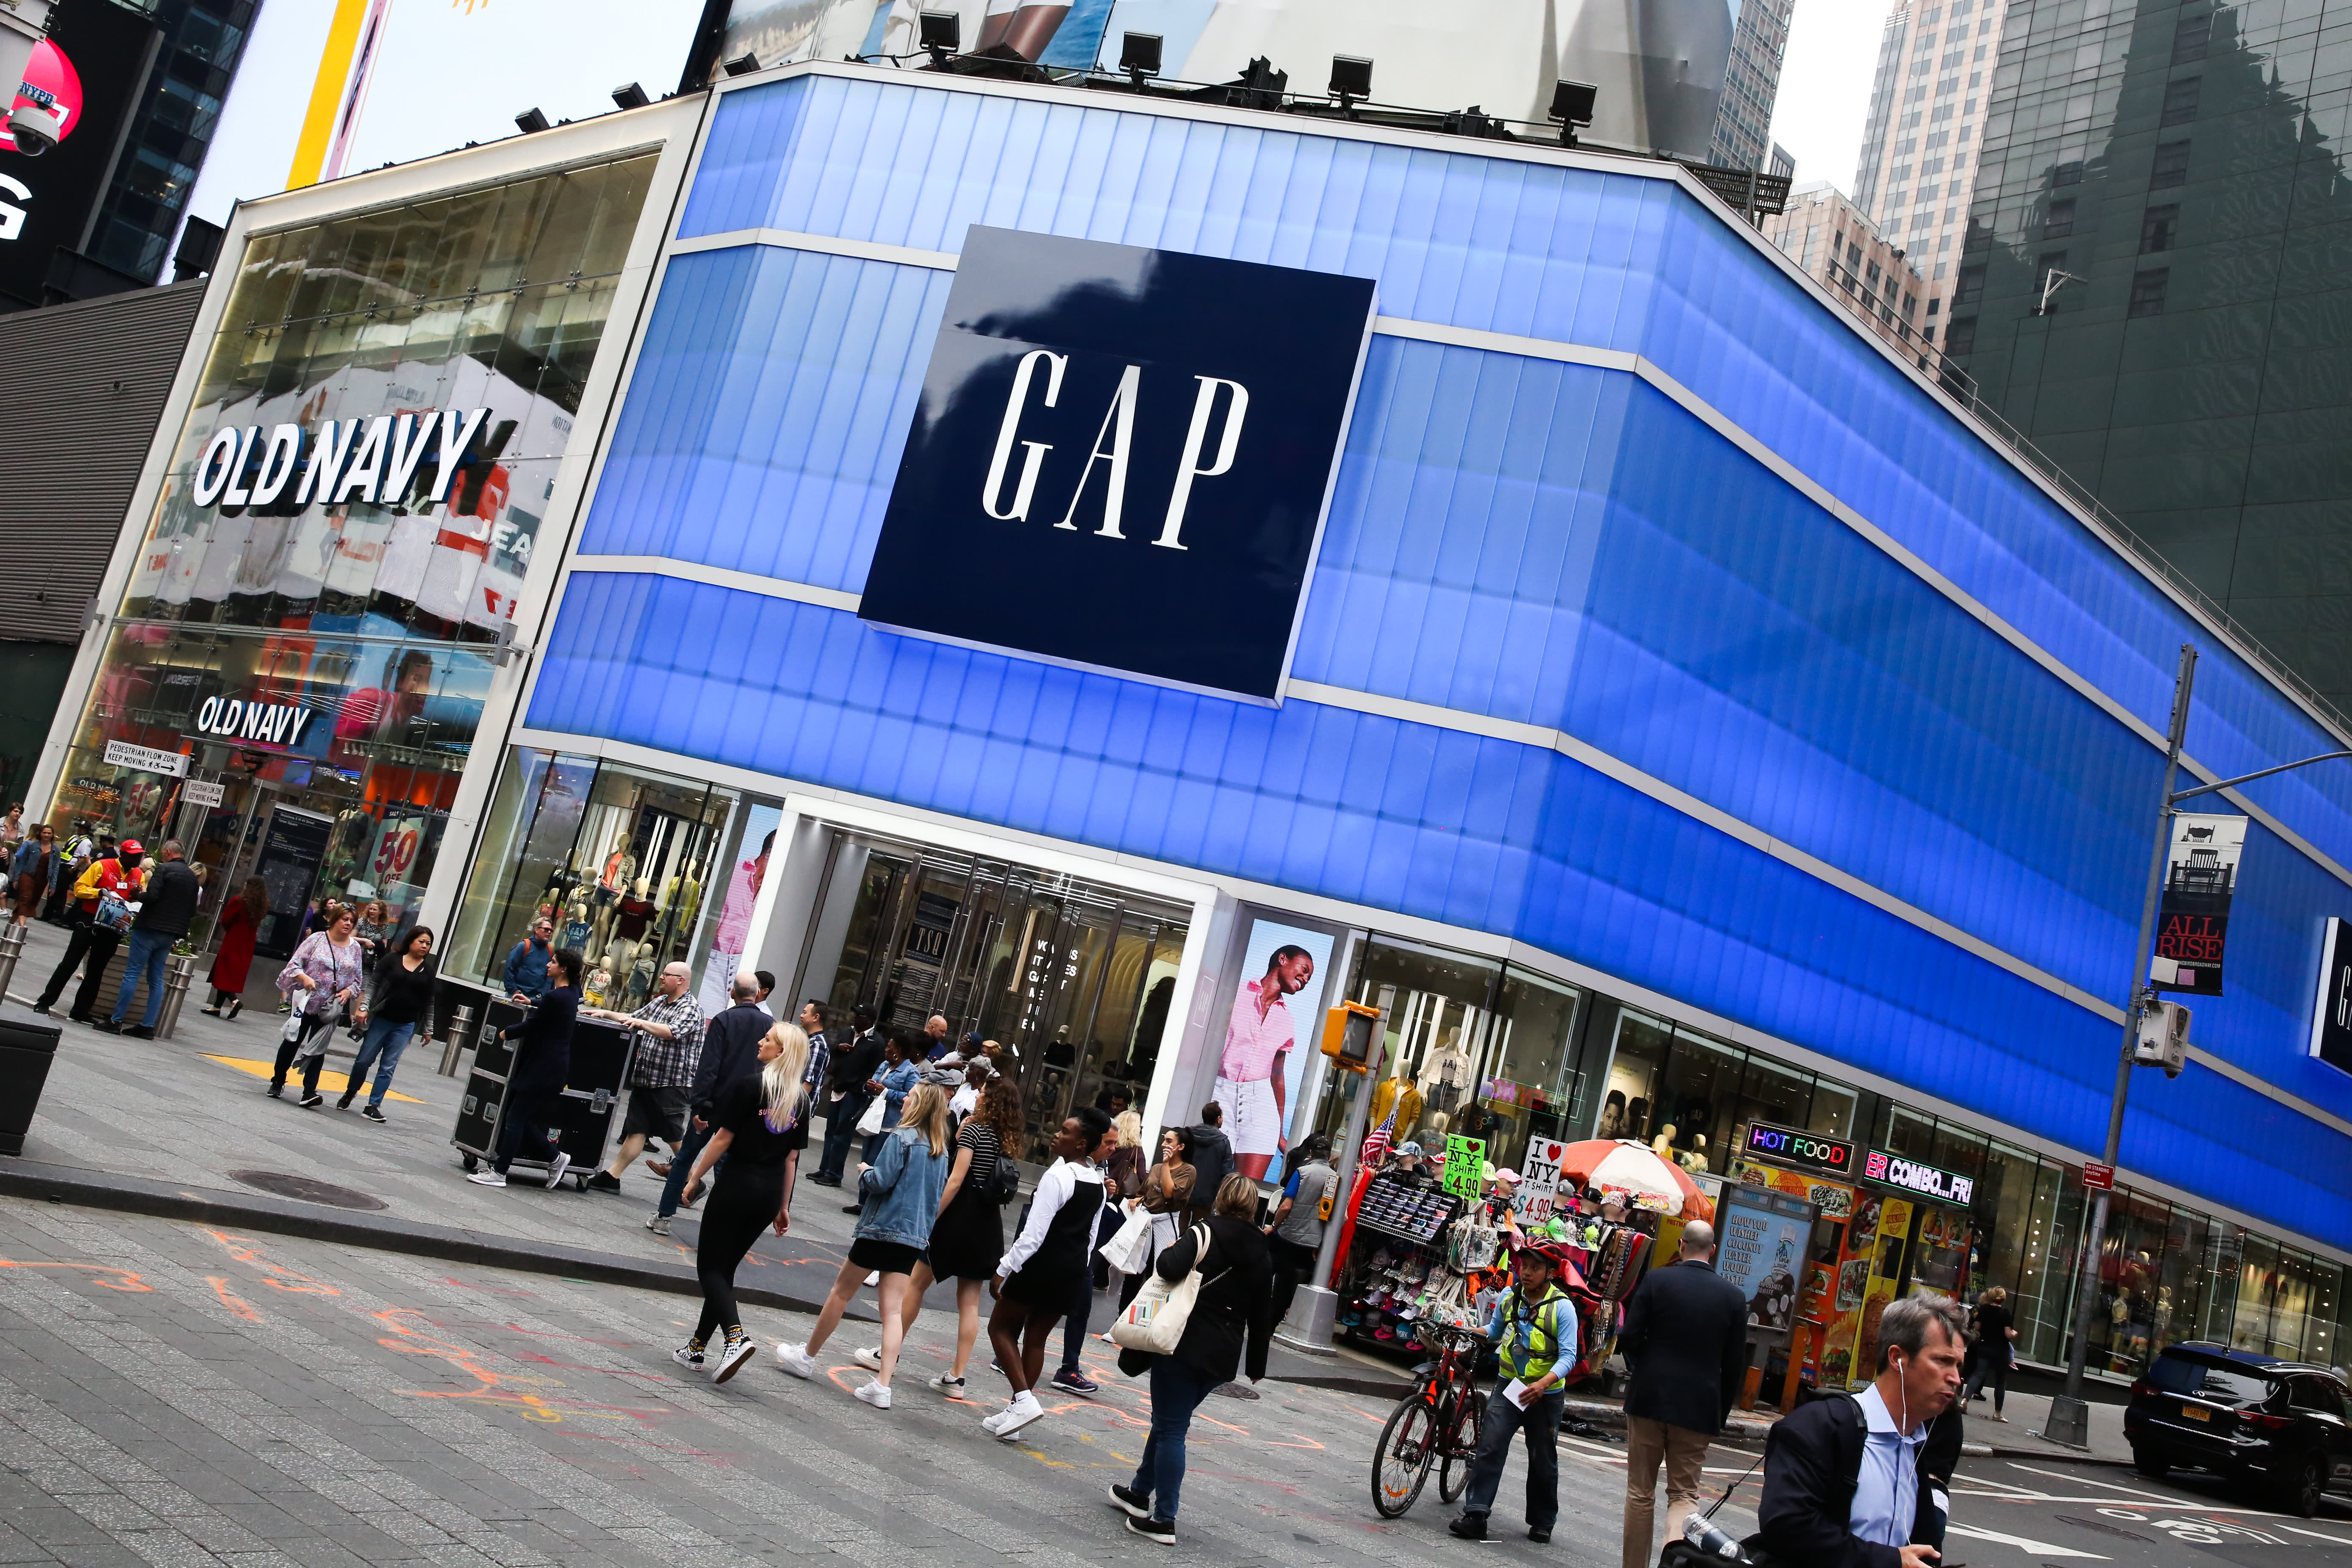 Gap's ad campaign tries to clarify its identity ahead of Old Navy spinoff